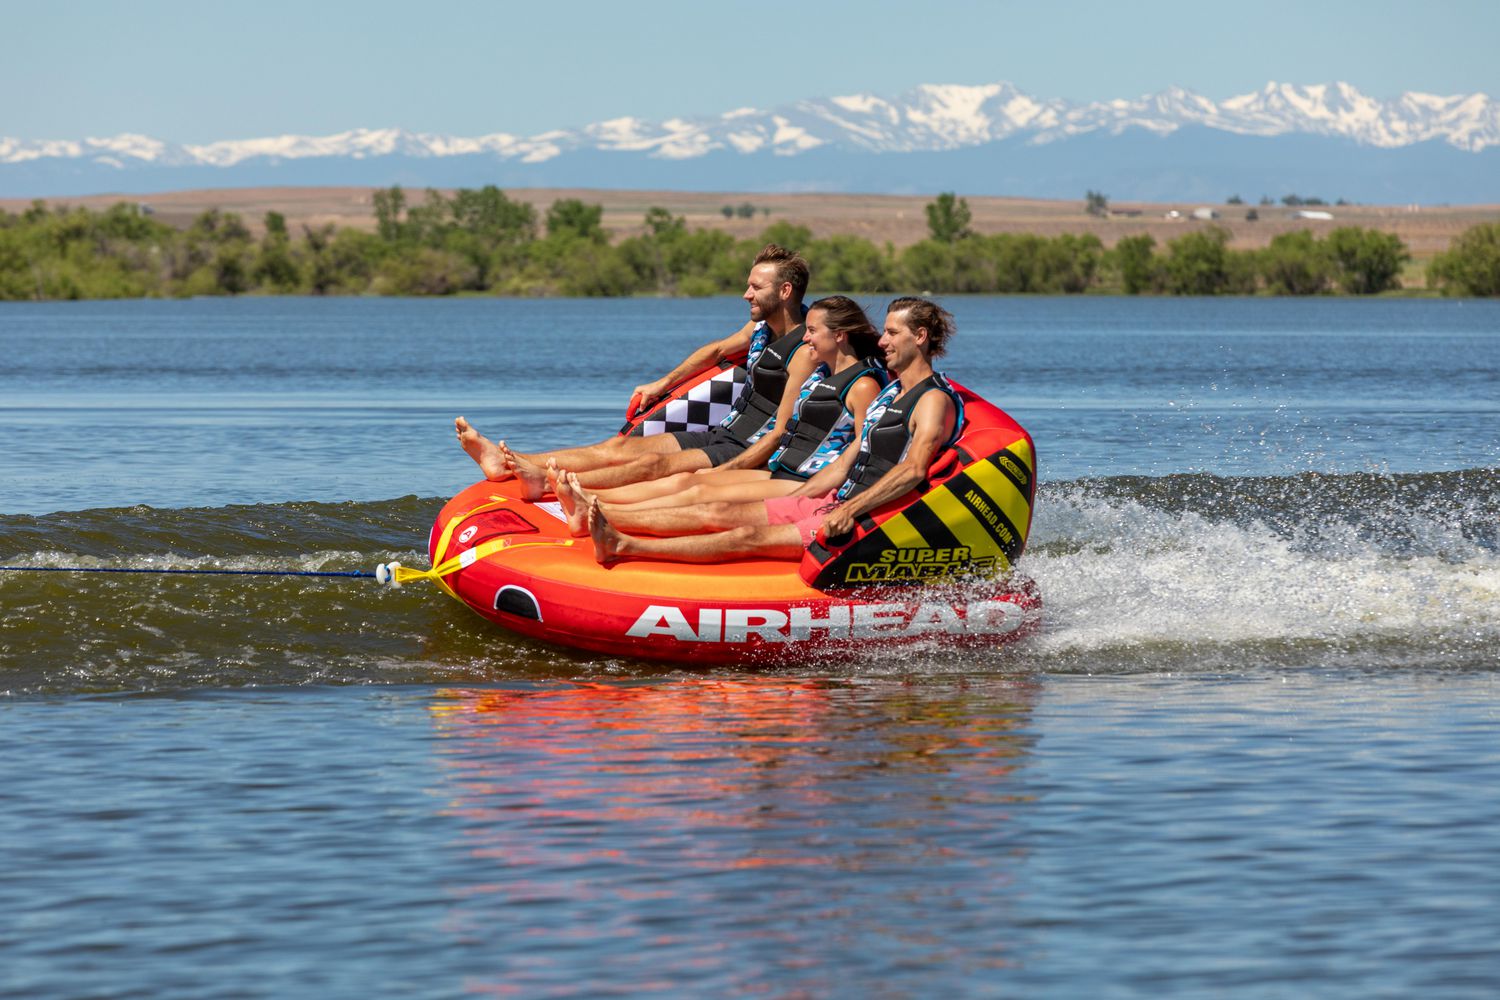 Airhead Super Mable 3-Person Towable Tube With Rope